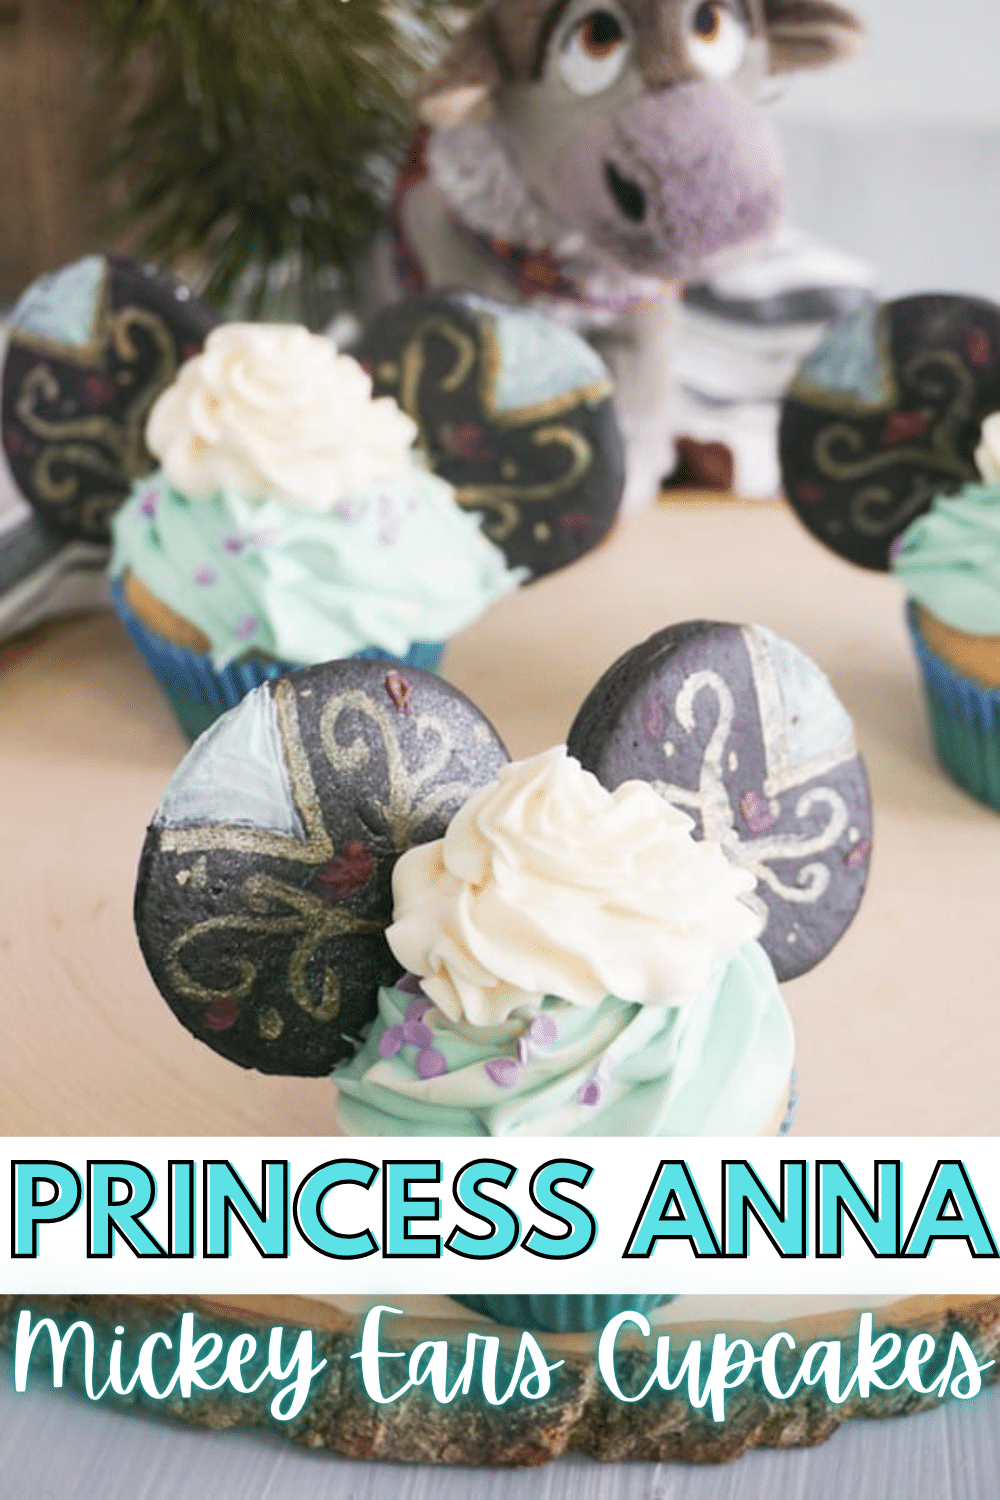 These easy Princess Anna Mickey Ears Cupcakes are super fun and look amazing. But I have a secret: they're really super easy and come together quick! #disneyprincesscupcakes #disneyprincessparty #disneyparty #frozenparty #frozen #frozencupcakes via @wondermomwannab